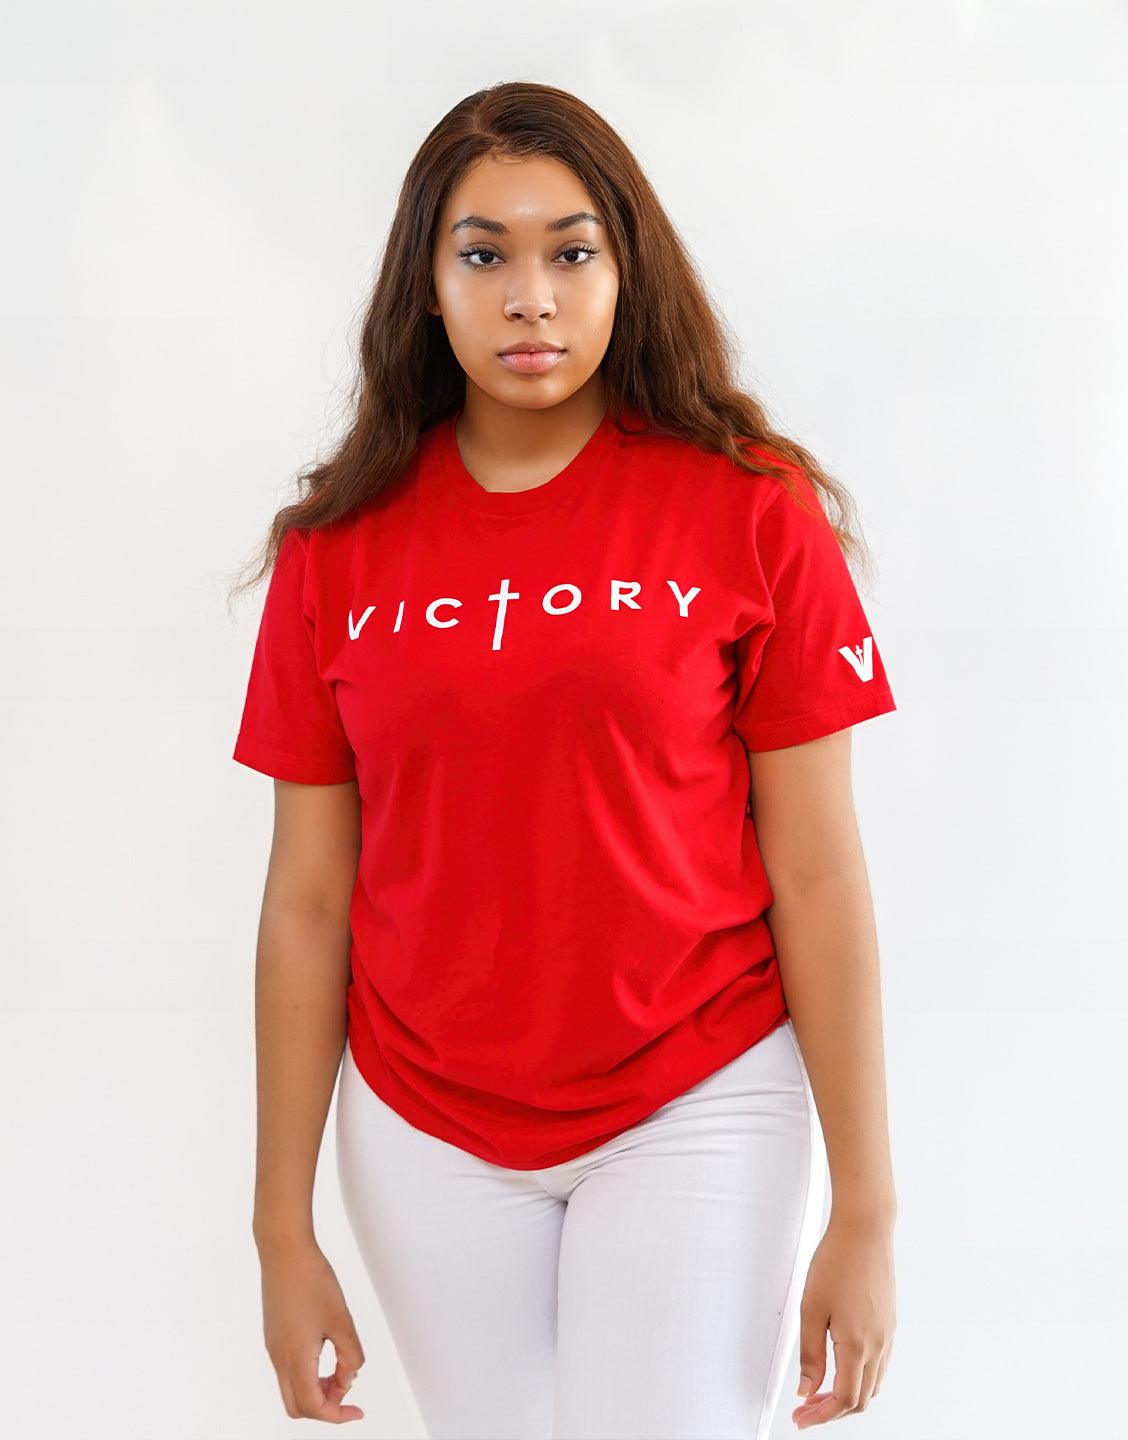 Victory Red T Shirt - VOTC Clothing